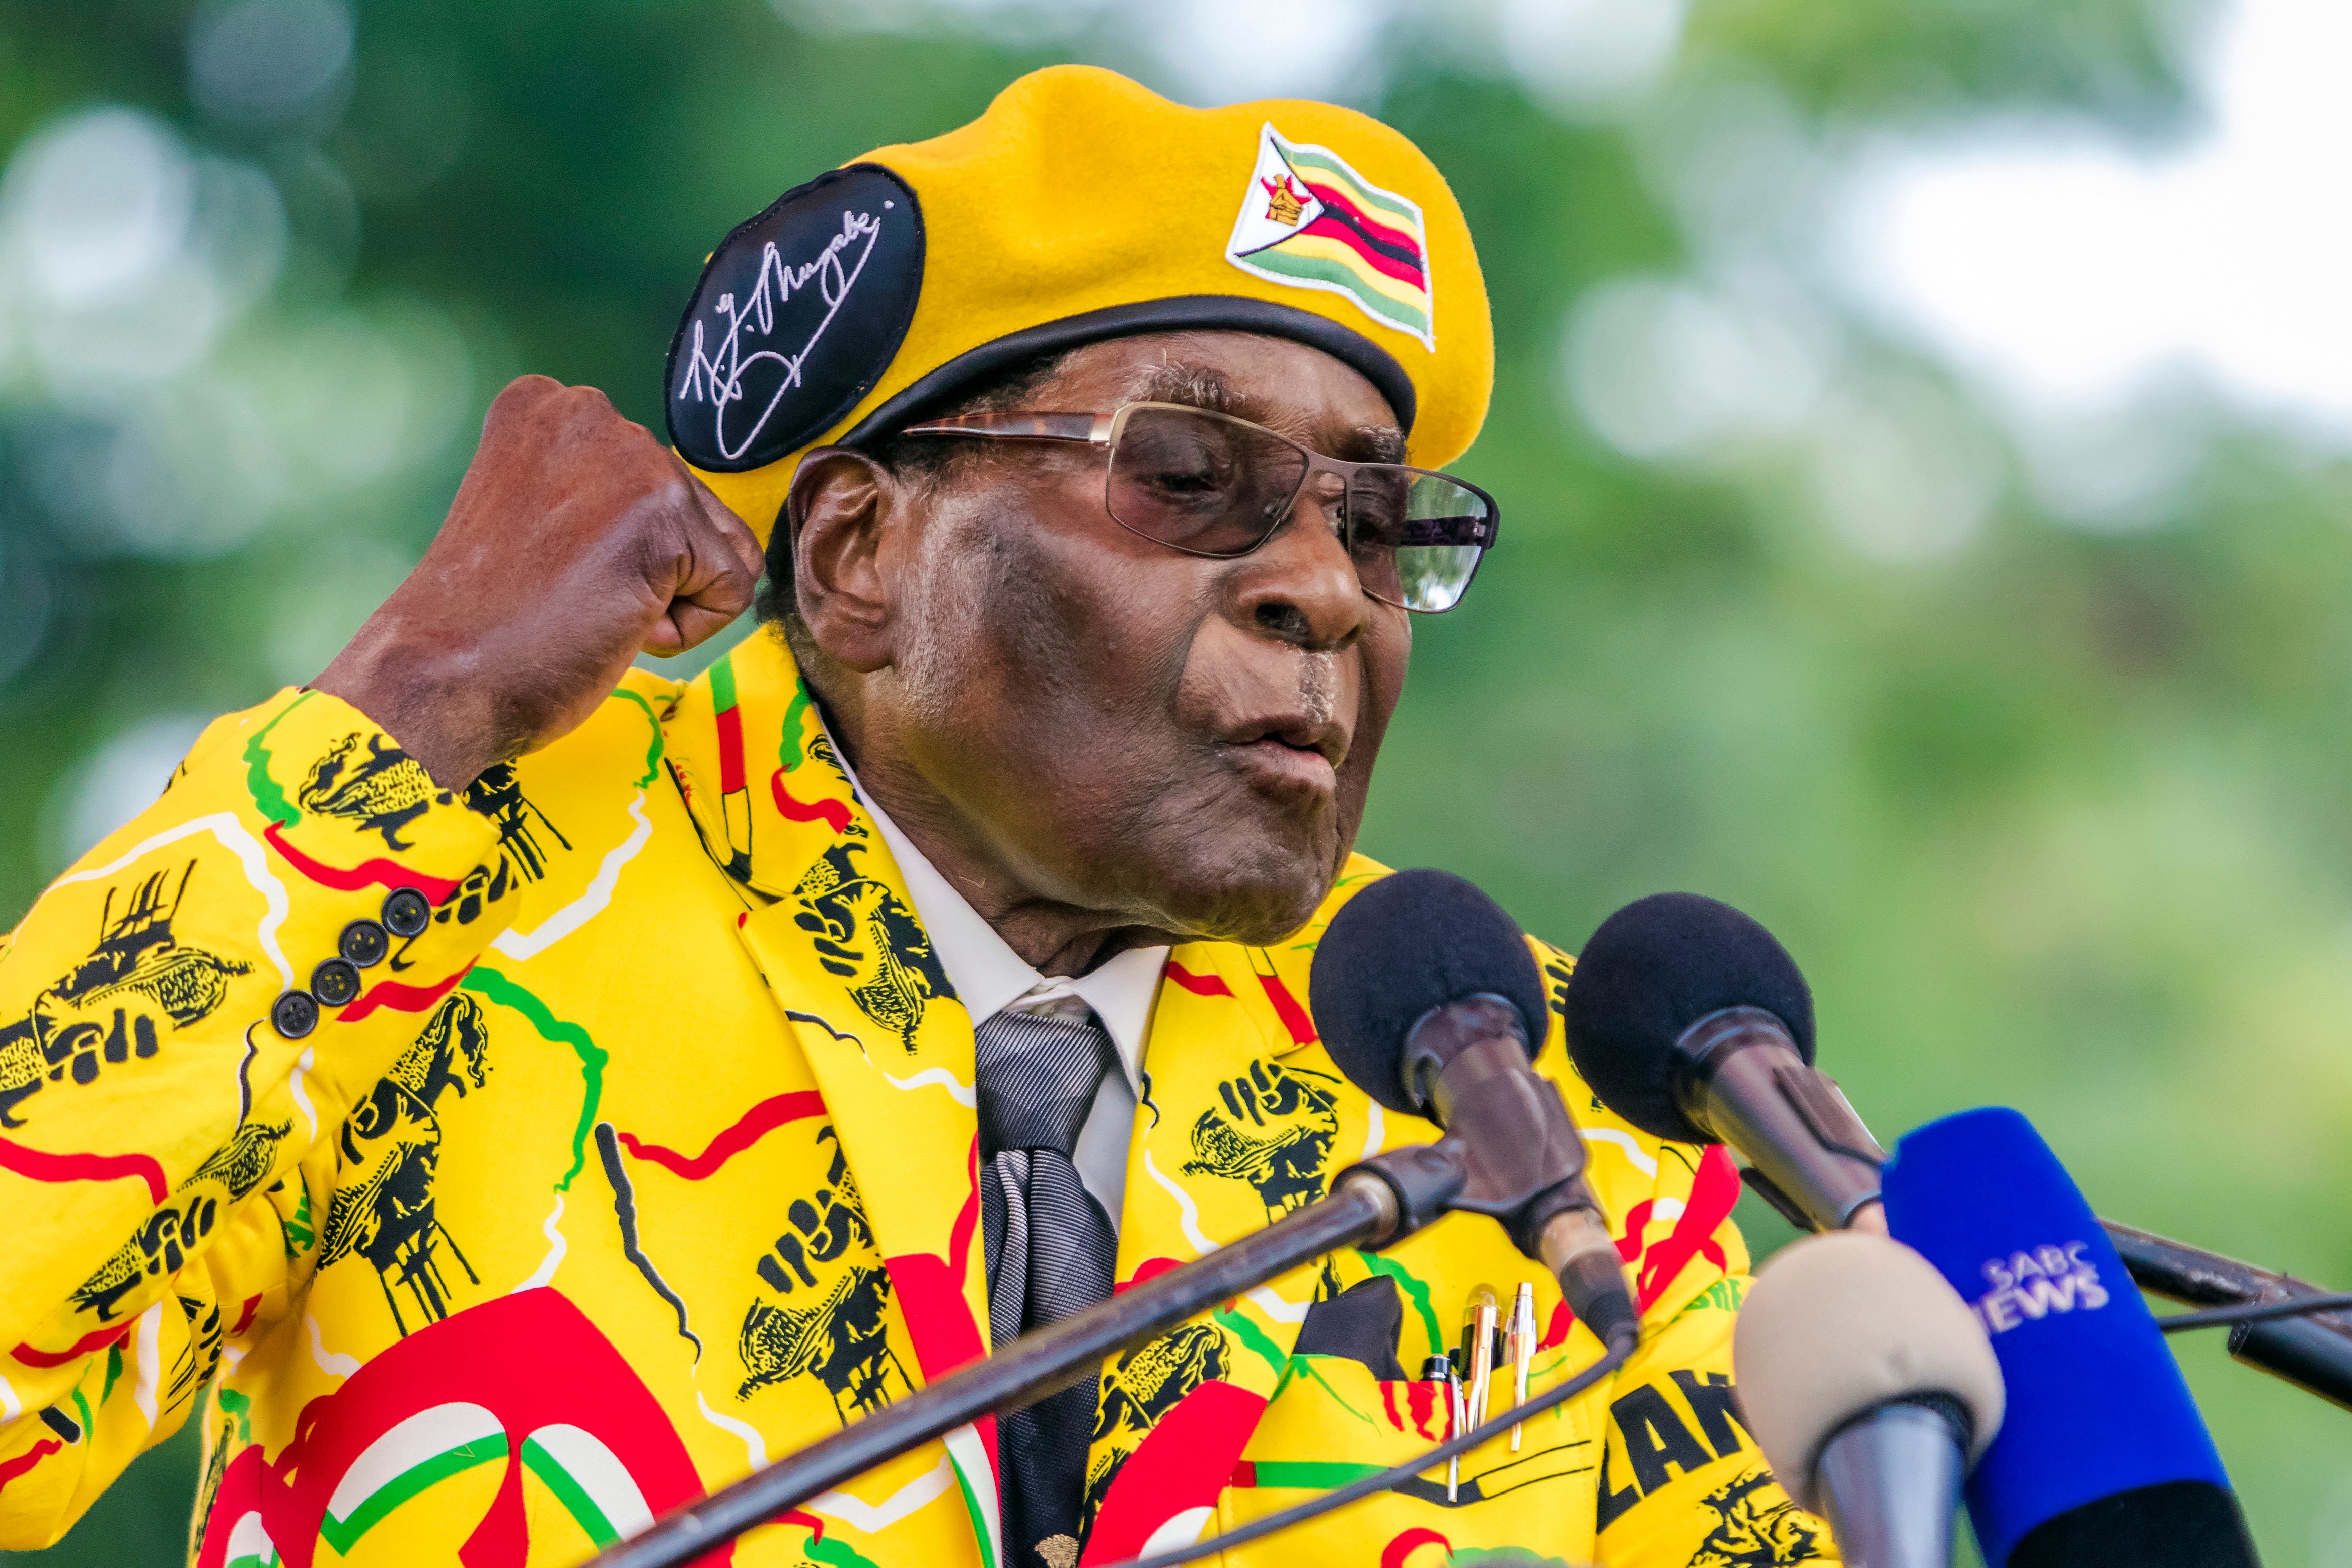 Robert Mugabe Accumulated Riches as Zimbabwe Crumbled. Here's What We Know About His Money